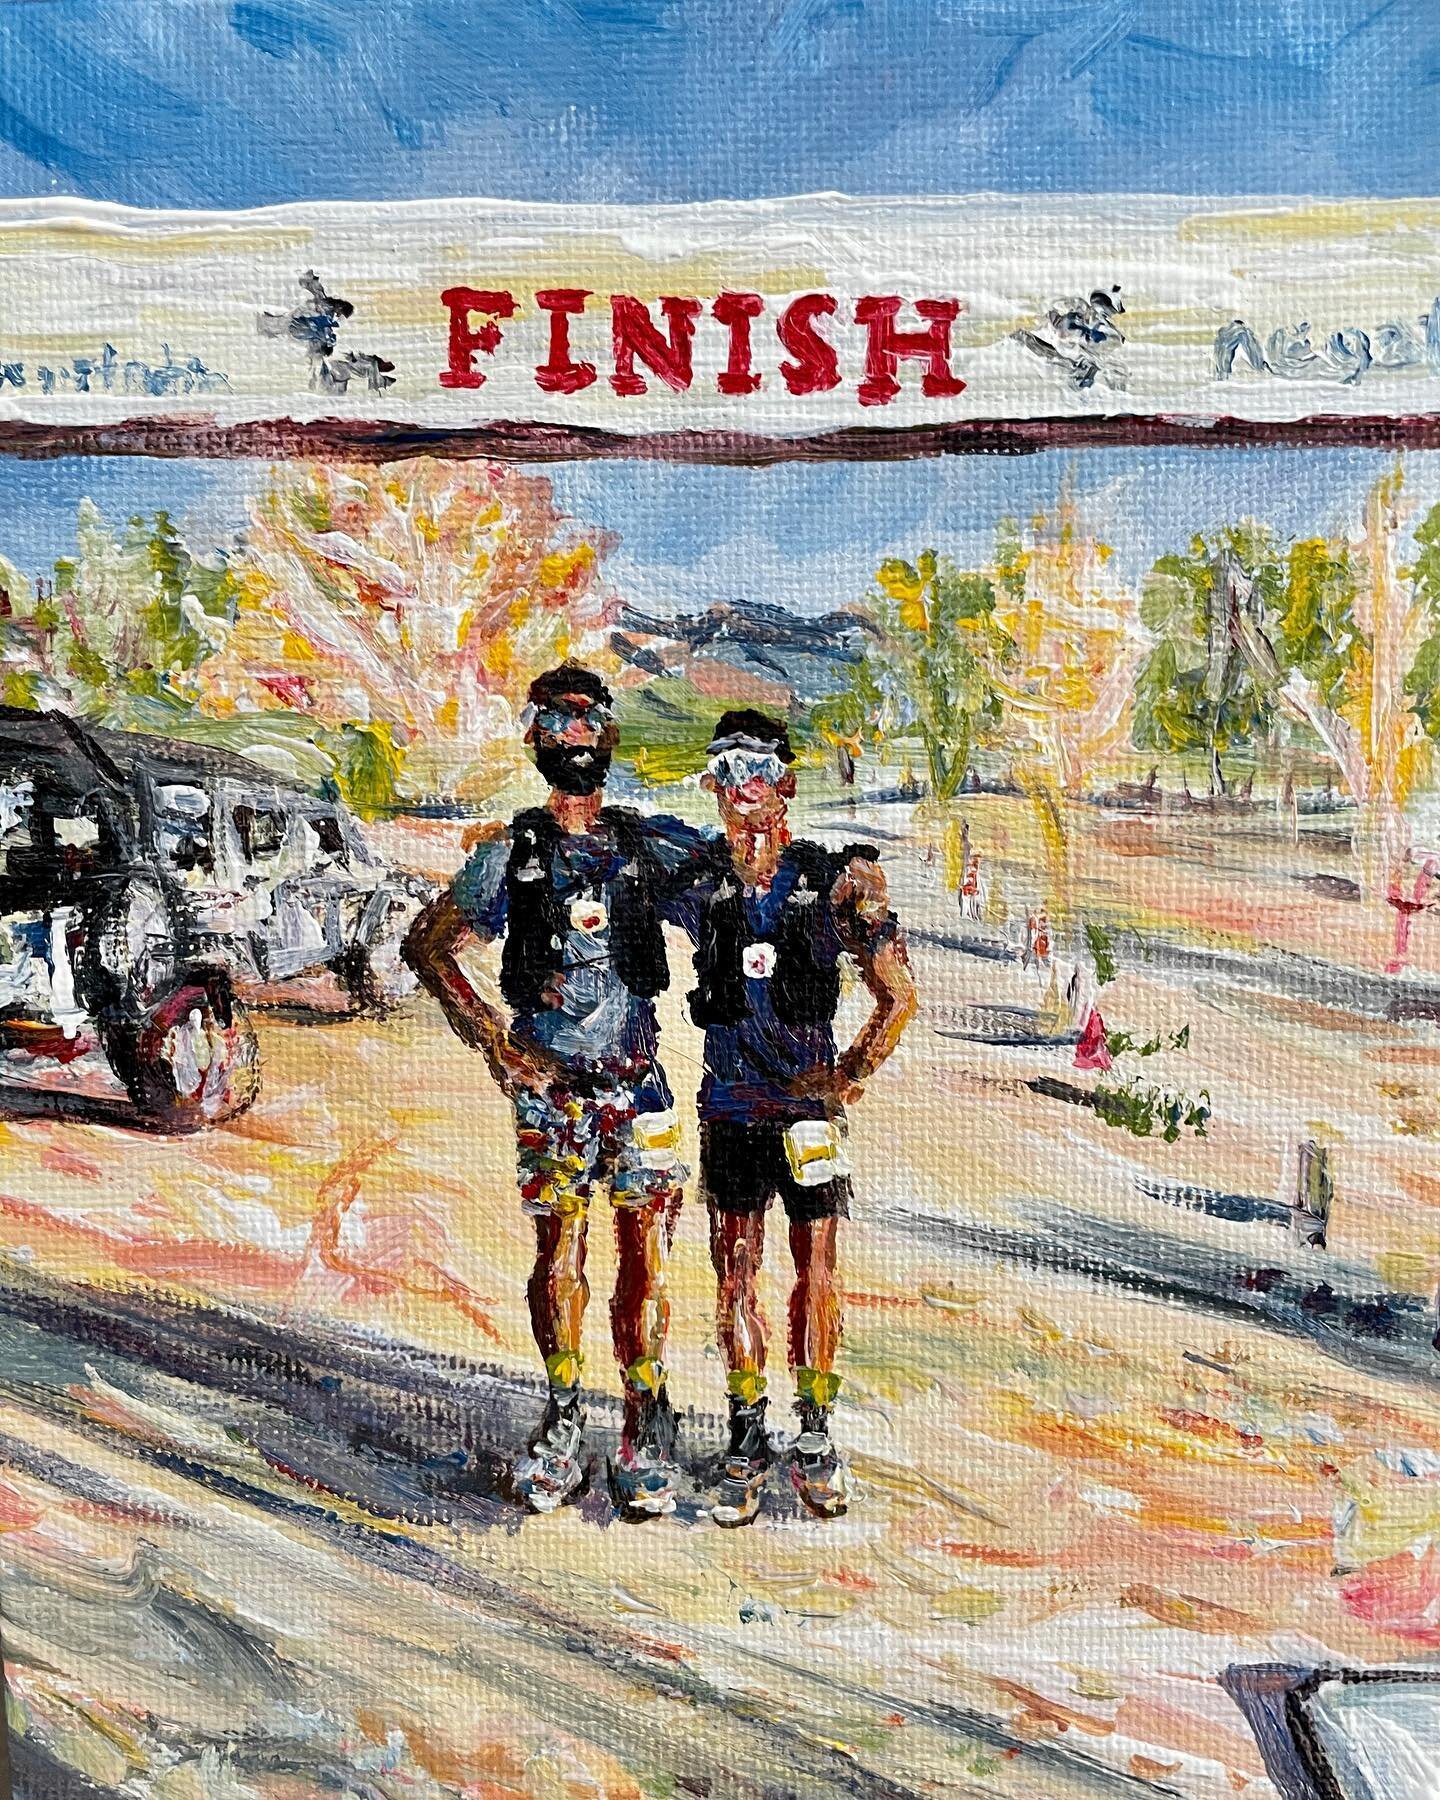 Yesterday&rsquo;s commissions 🙌 That race finish line is the Bishop High Sierra Ultras. Marcos and his cousin Manny ran the 50 miler. He&rsquo;s giving this painting to Manny as a gift for his birthday in a few days. 

As soon as I finished painting